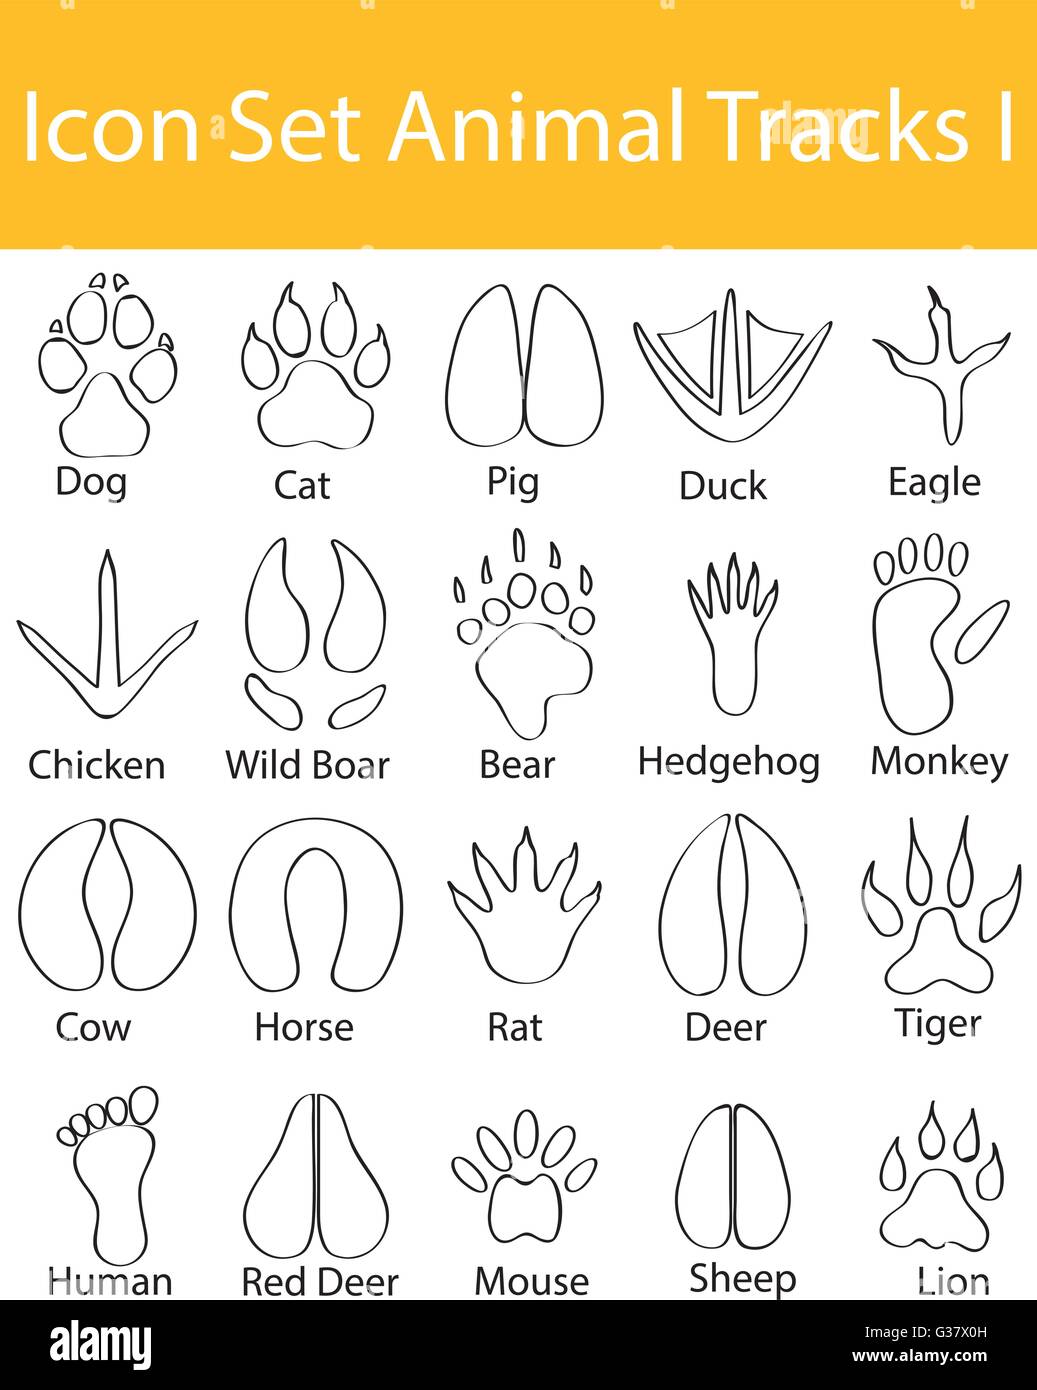 Drawn Doodle Lined Icon Set Animal Tracks I with 20 icons for the creative use in graphic design Stock Vector